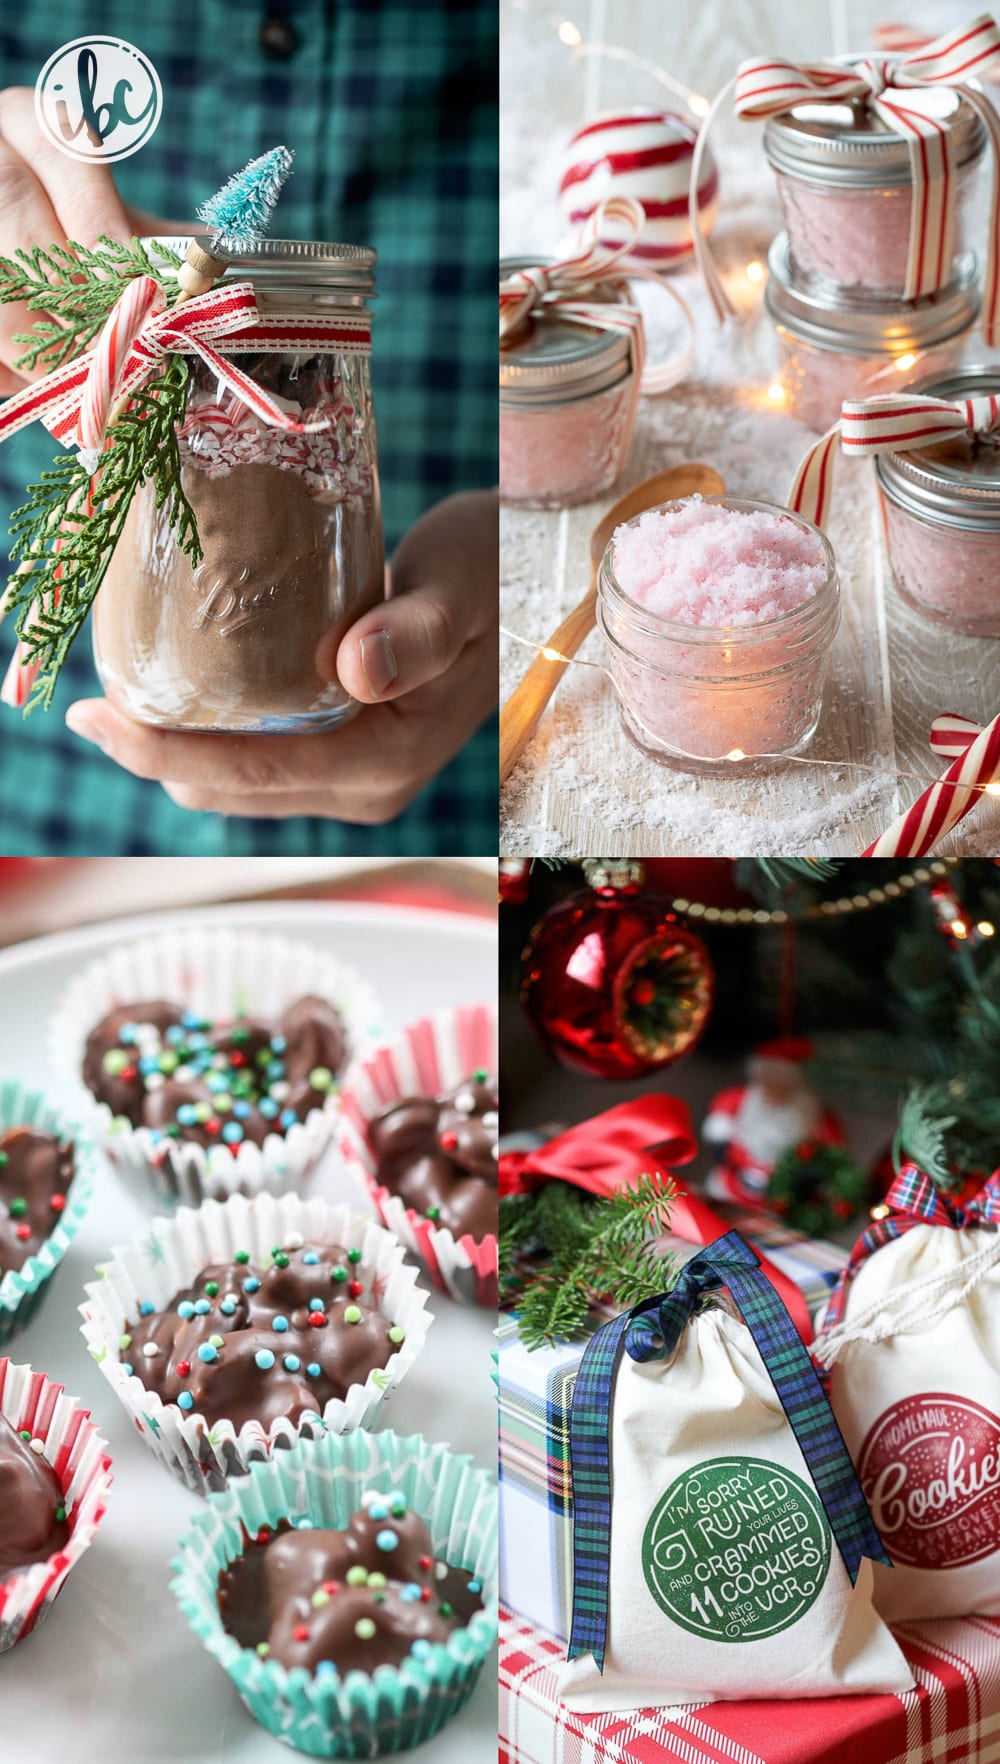 four holiday christmas gift ideas with candy, hot cocoa and peppermint scrub.